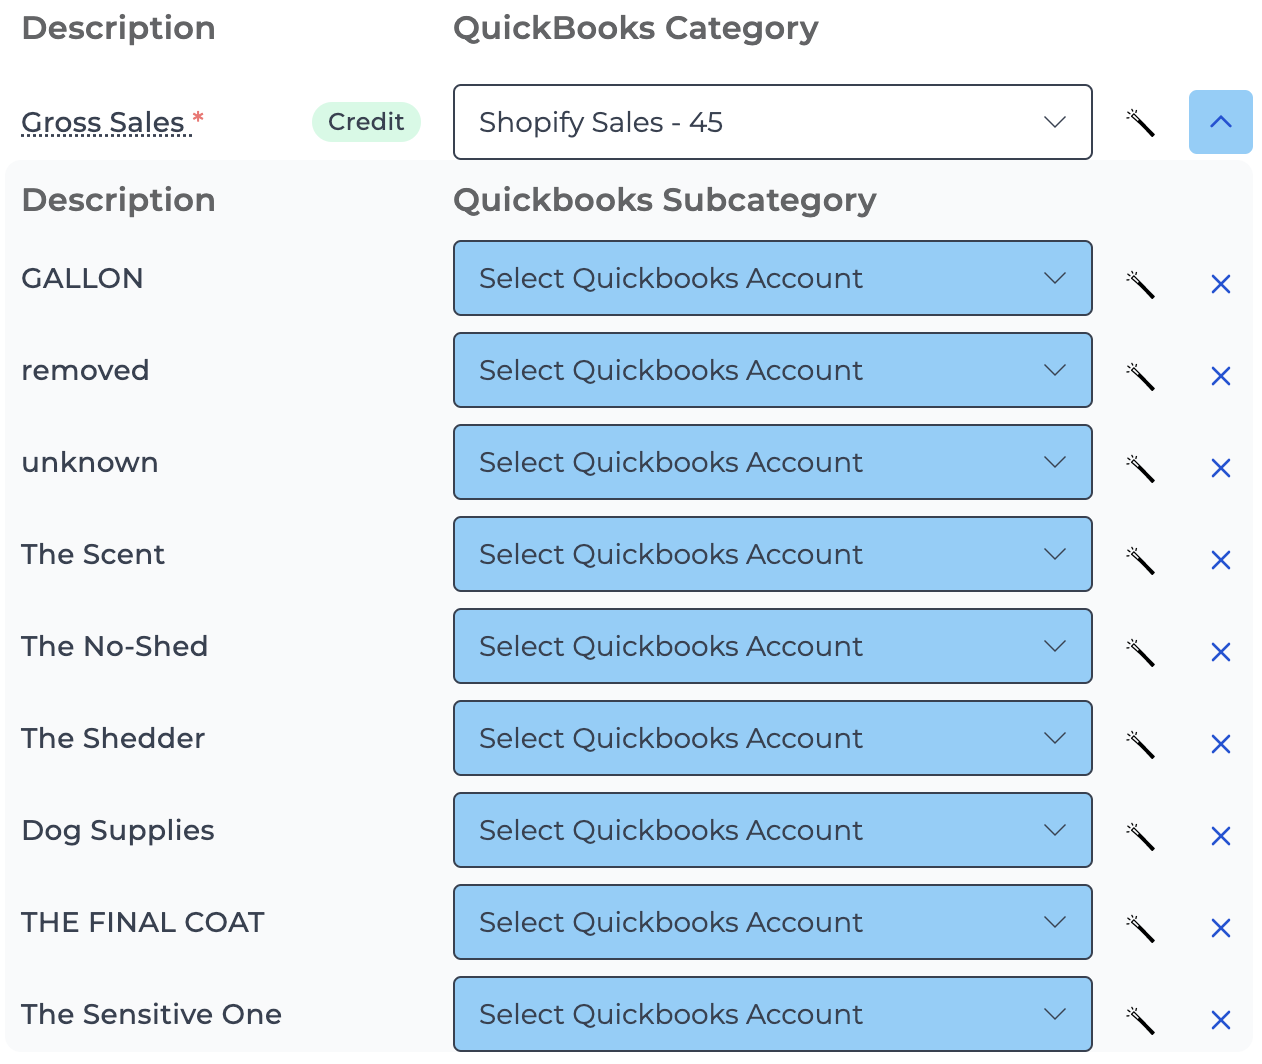 Mapping gross sales subcategories